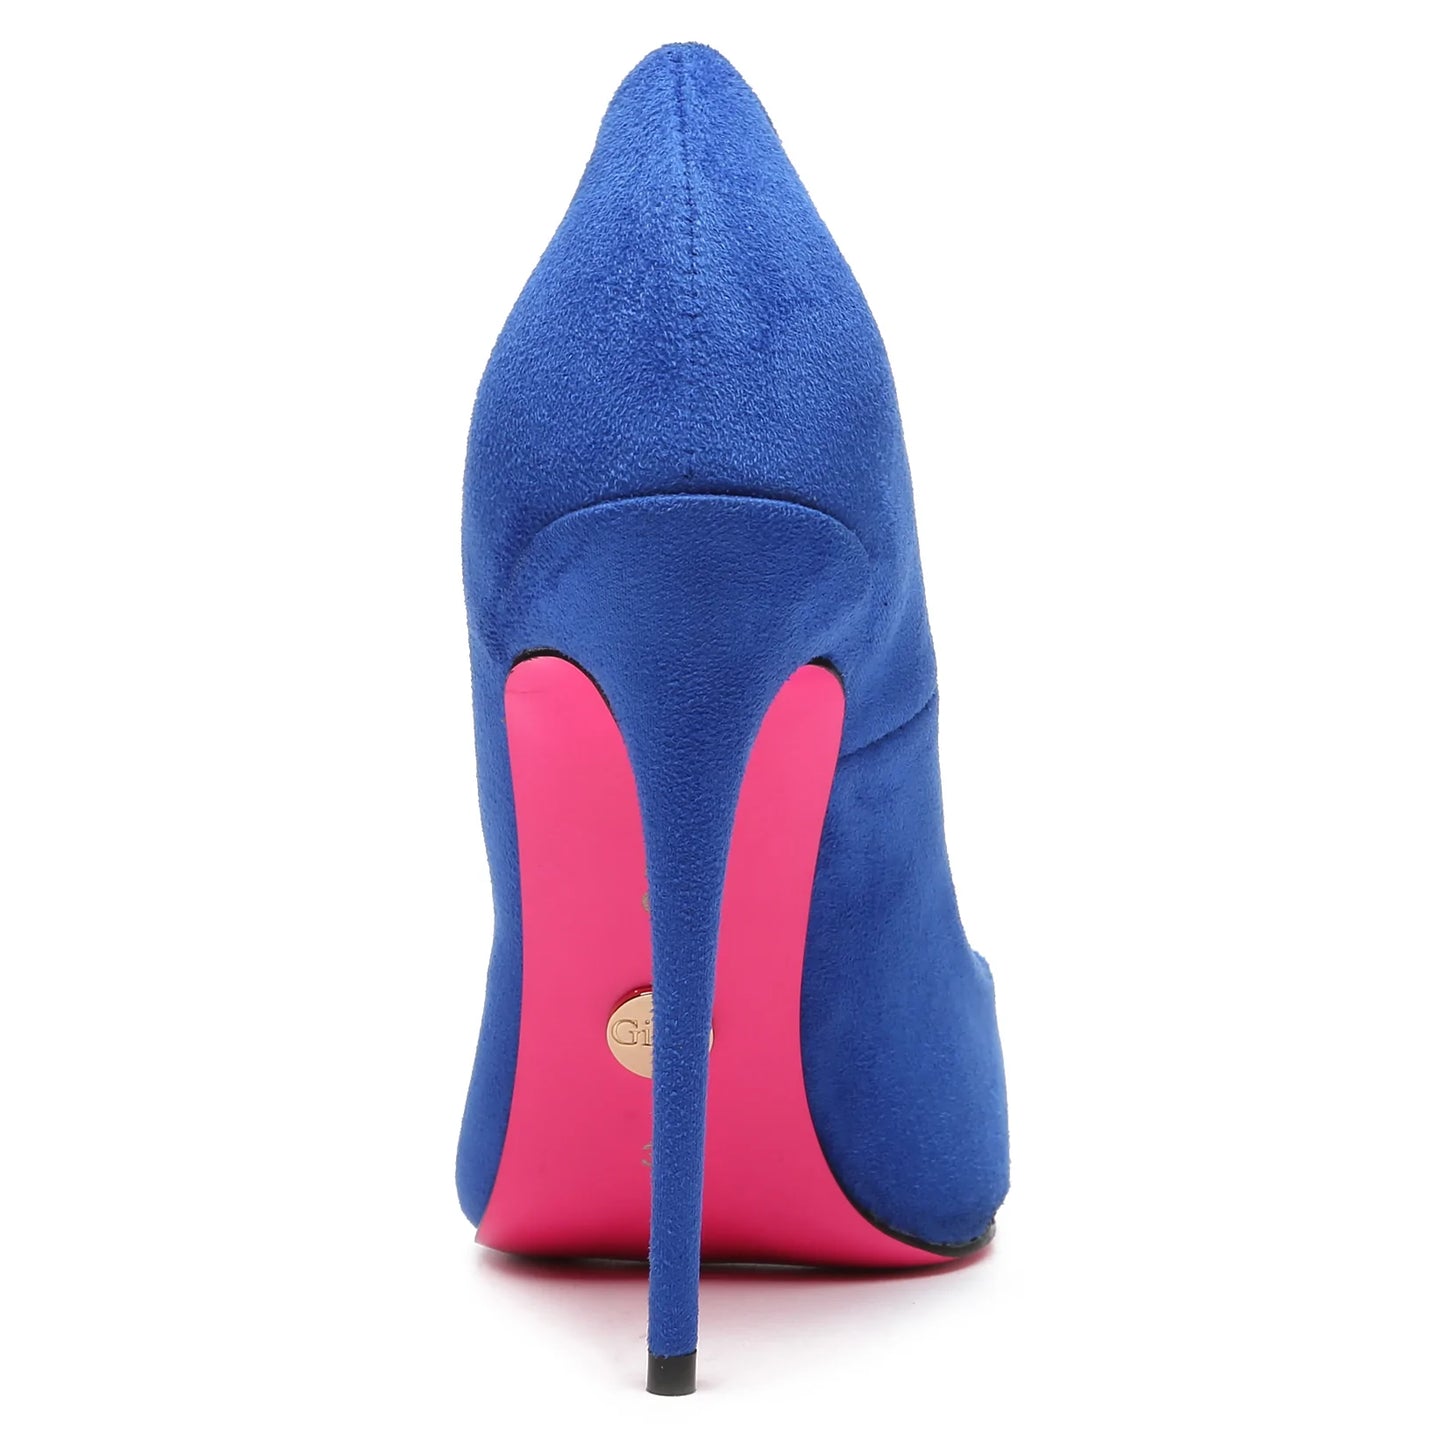 Pointed pumps